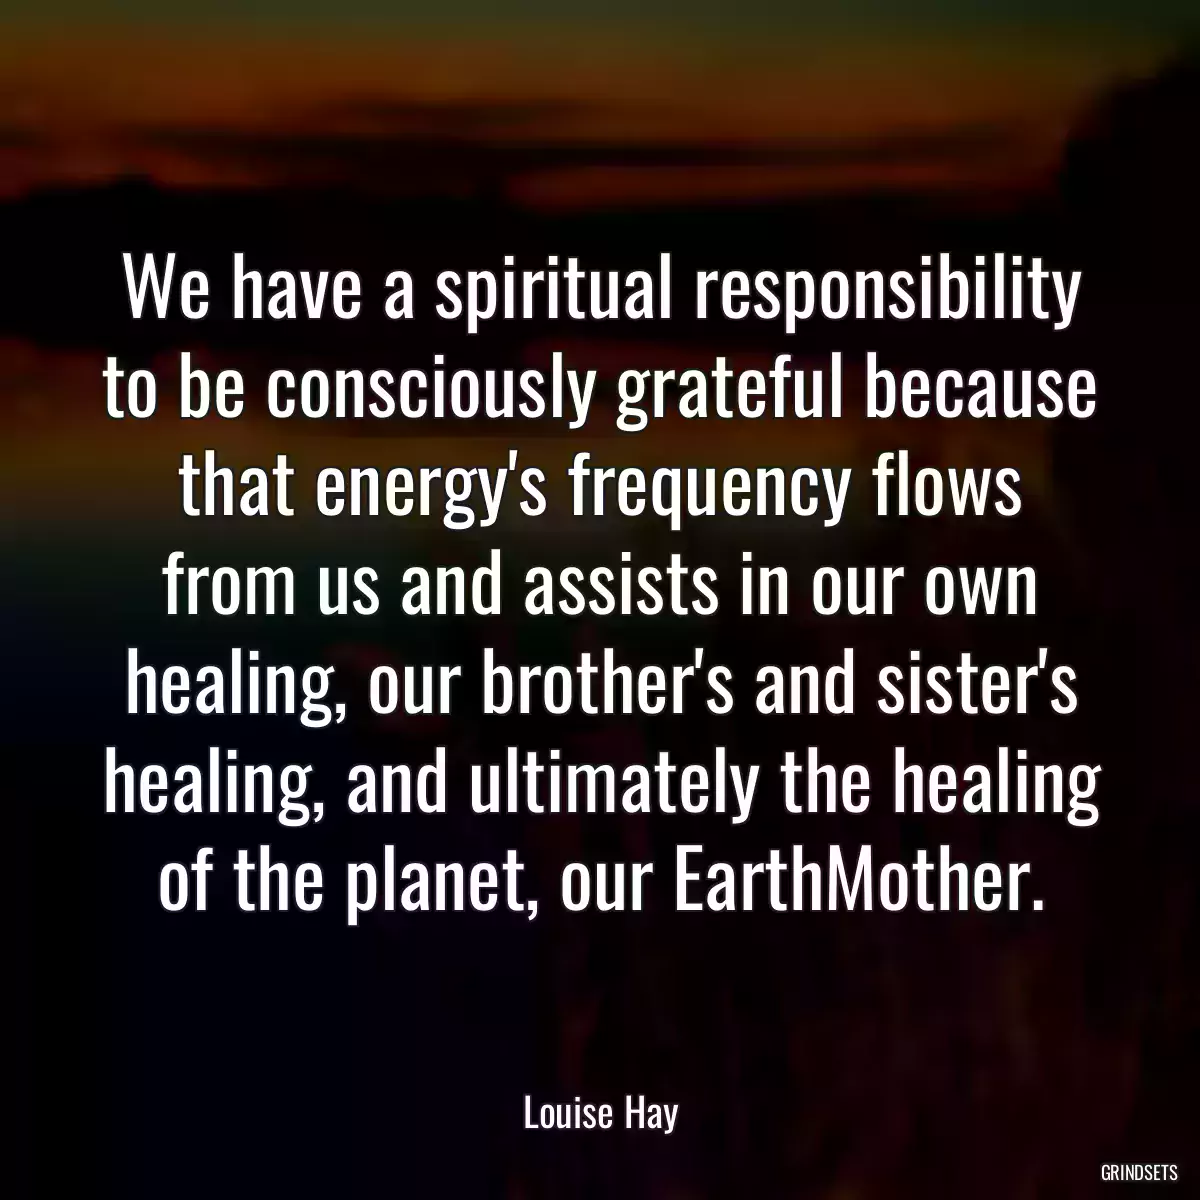 We have a spiritual responsibility to be consciously grateful because that energy\'s frequency flows from us and assists in our own healing, our brother\'s and sister\'s healing, and ultimately the healing of the planet, our EarthMother.